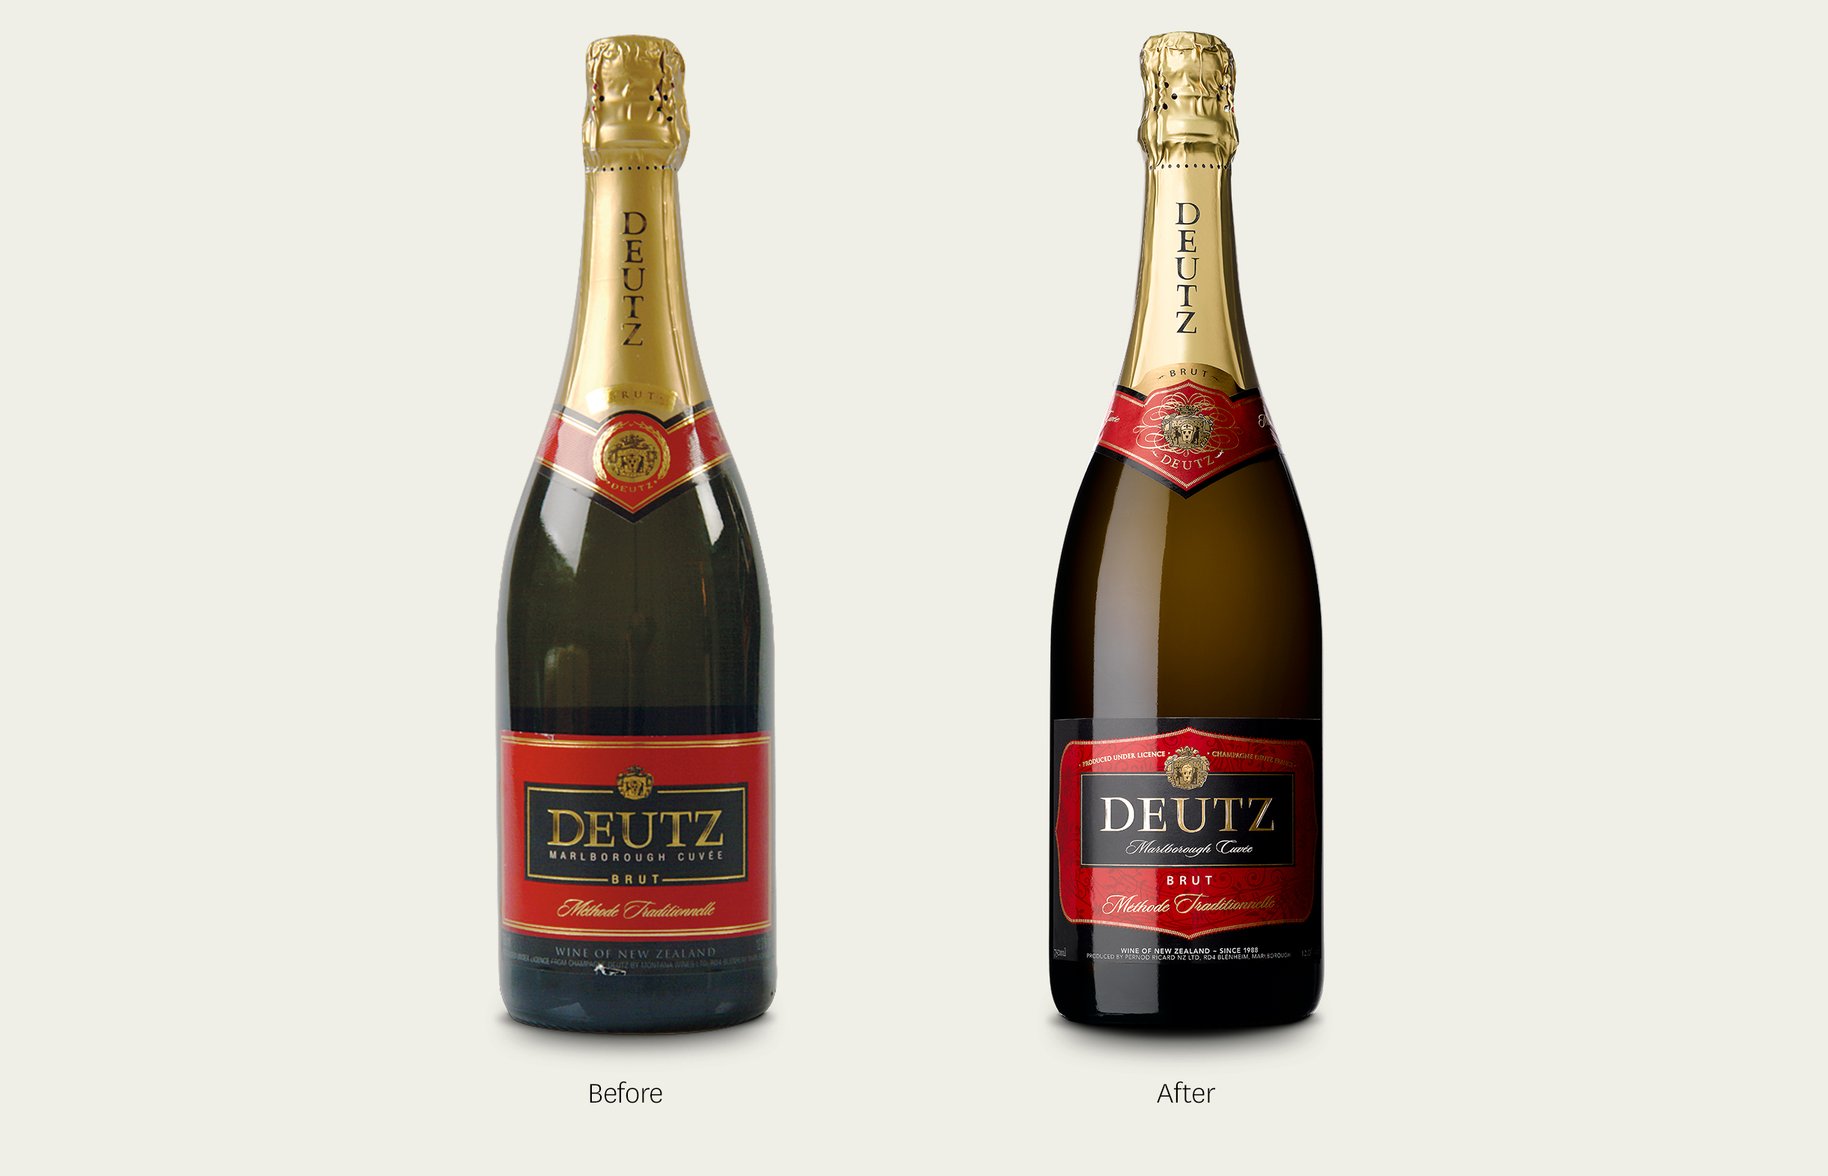 Deutz bottle packaging before and after